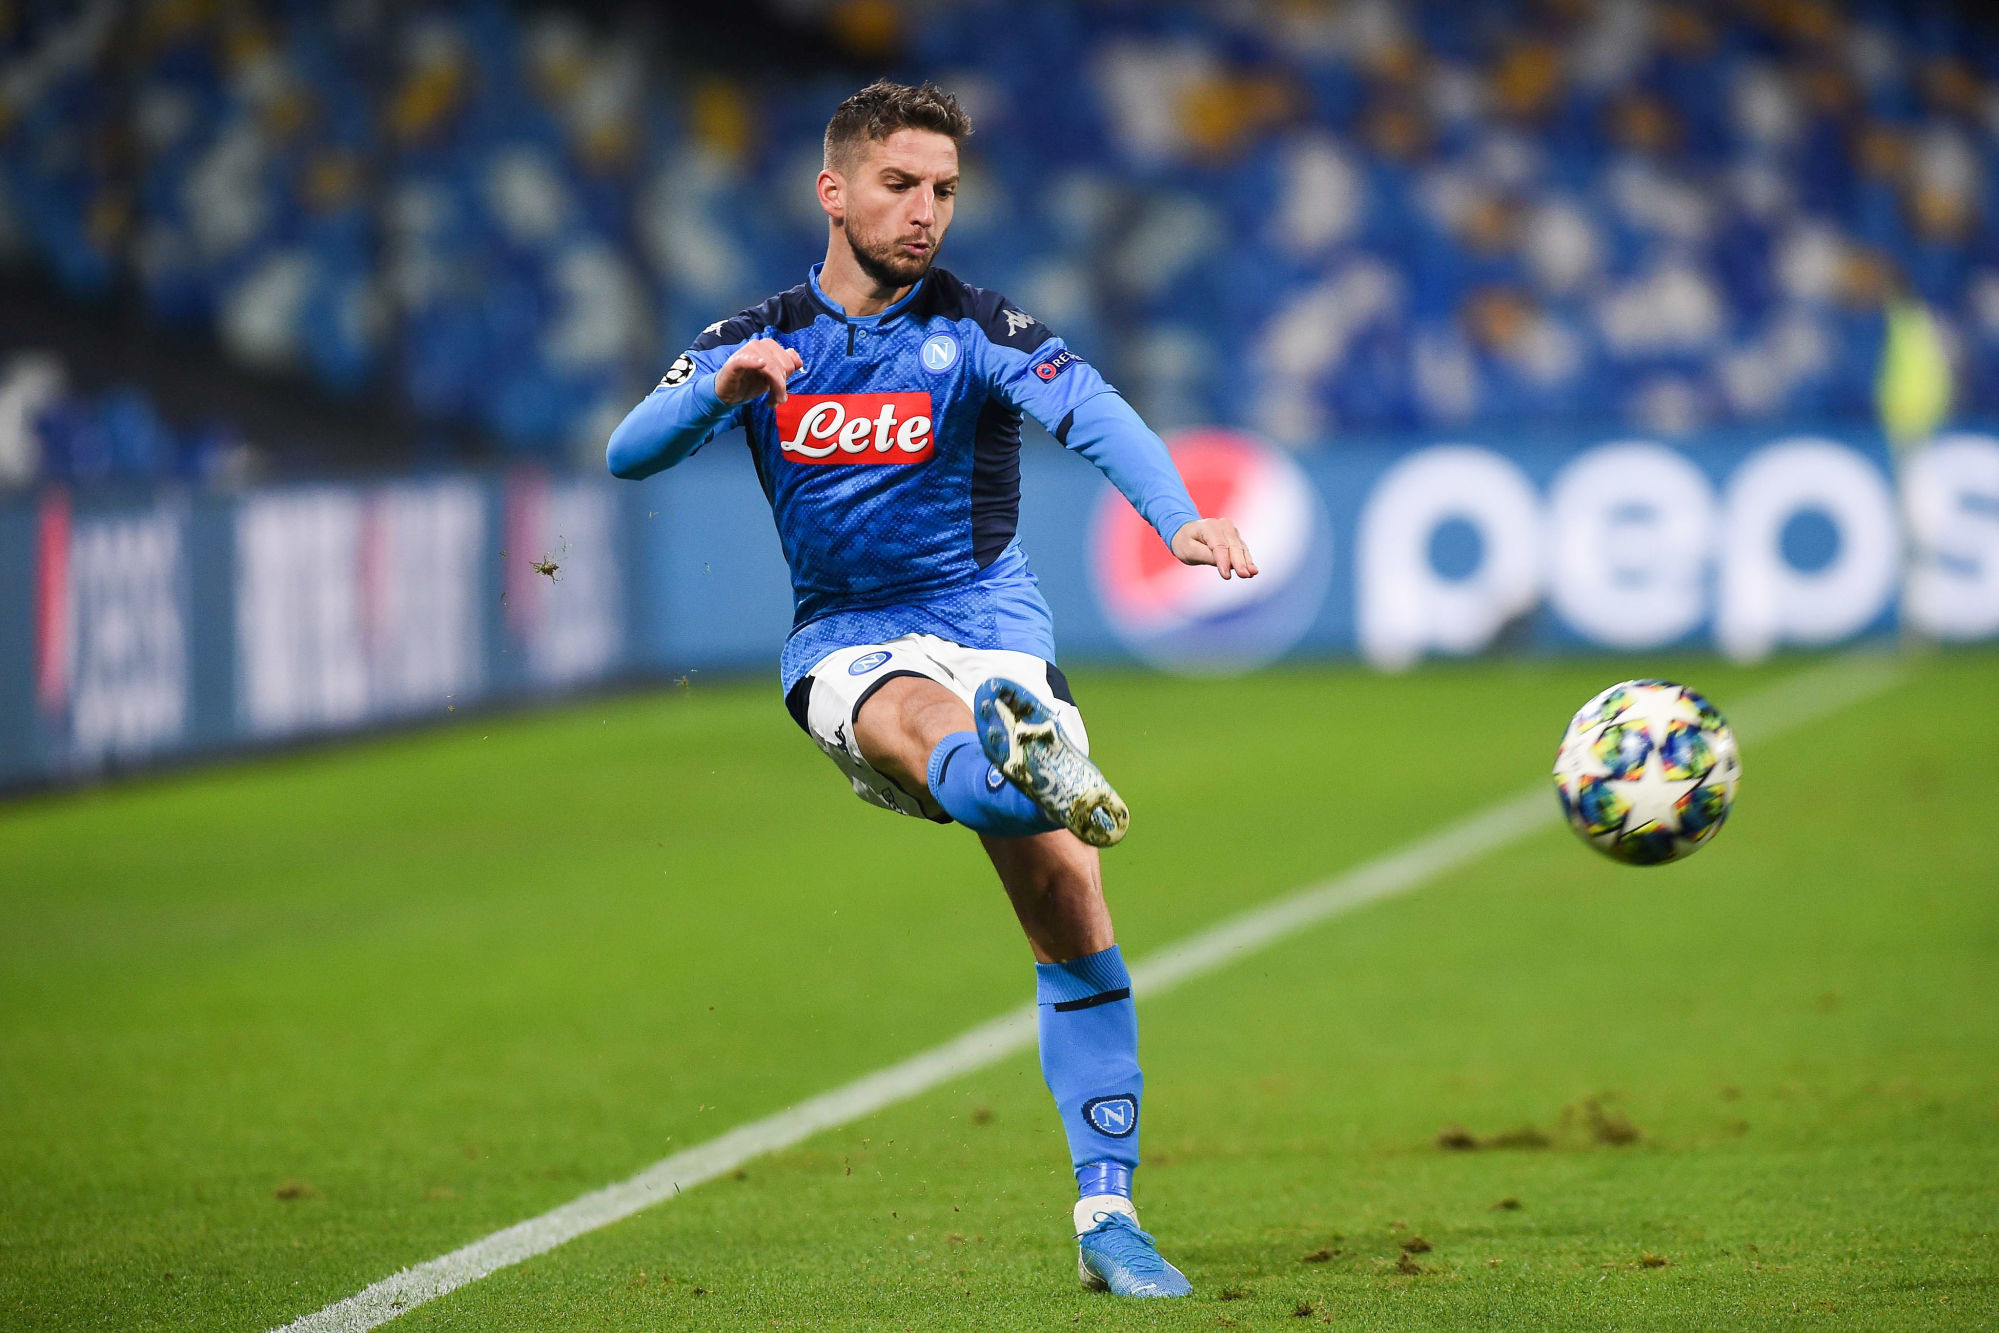 Dries Mertens of SSC Napoli during the UEFA Champions League match between SSC Napoli and KRC Genk at Stadio San Paolo Naples Italy on 10 December 2019.
PILKA NOZNA SEZON 2019/2020 LIGA MISTRZOW
FOT. SPORTPHOTO24/NEWSPIX.PL
ENGLAND OUT!
---
Newspix.pl 

Photo by Icon Sport - Dries MERTENS - Stade San Paolo - Naples (Italie)